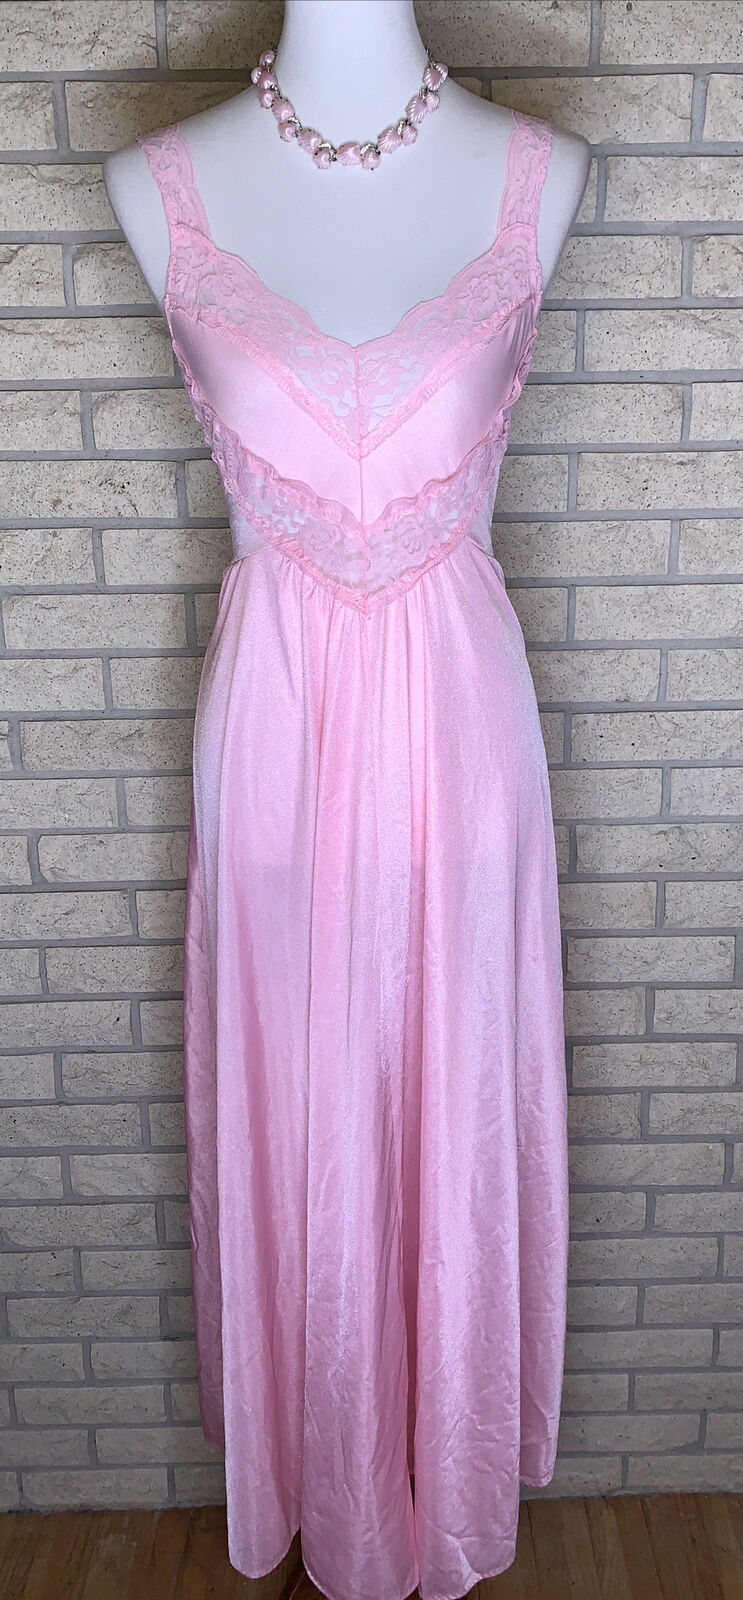 Vtg 1960s Eyeful Pink Nylon & Lace Nightgown Peignoir Size Large Pin Up Negligie